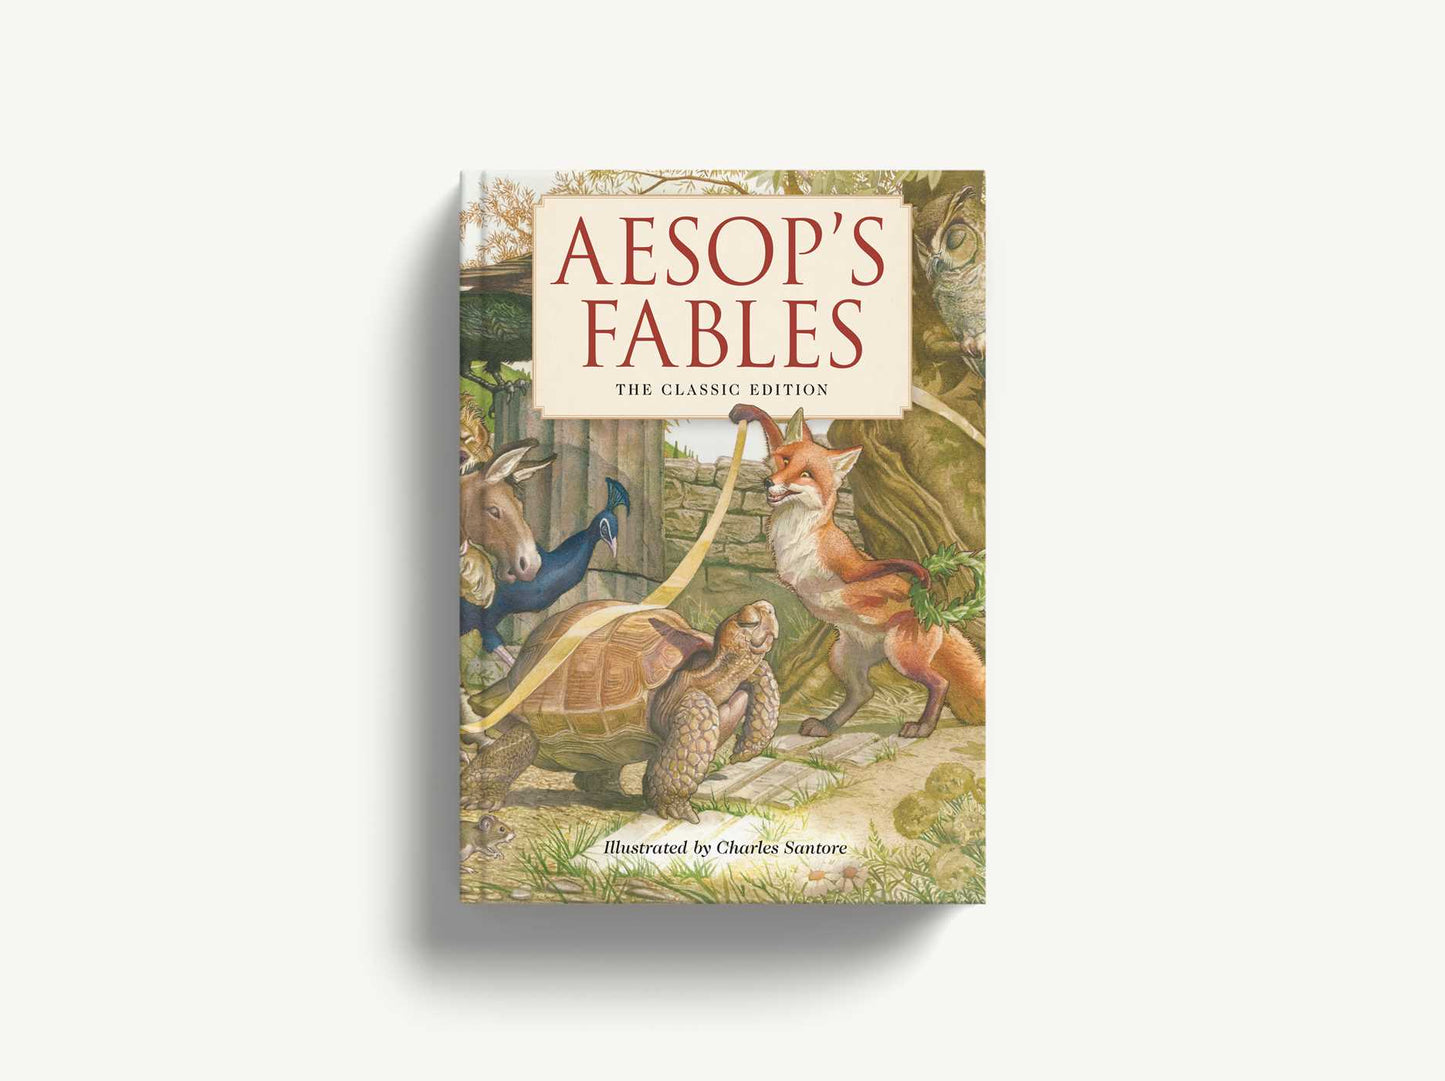 Aesop's Fables Hardcover: The Classic Edition by The New York Times Bestselling Illustrator, Charles Santore